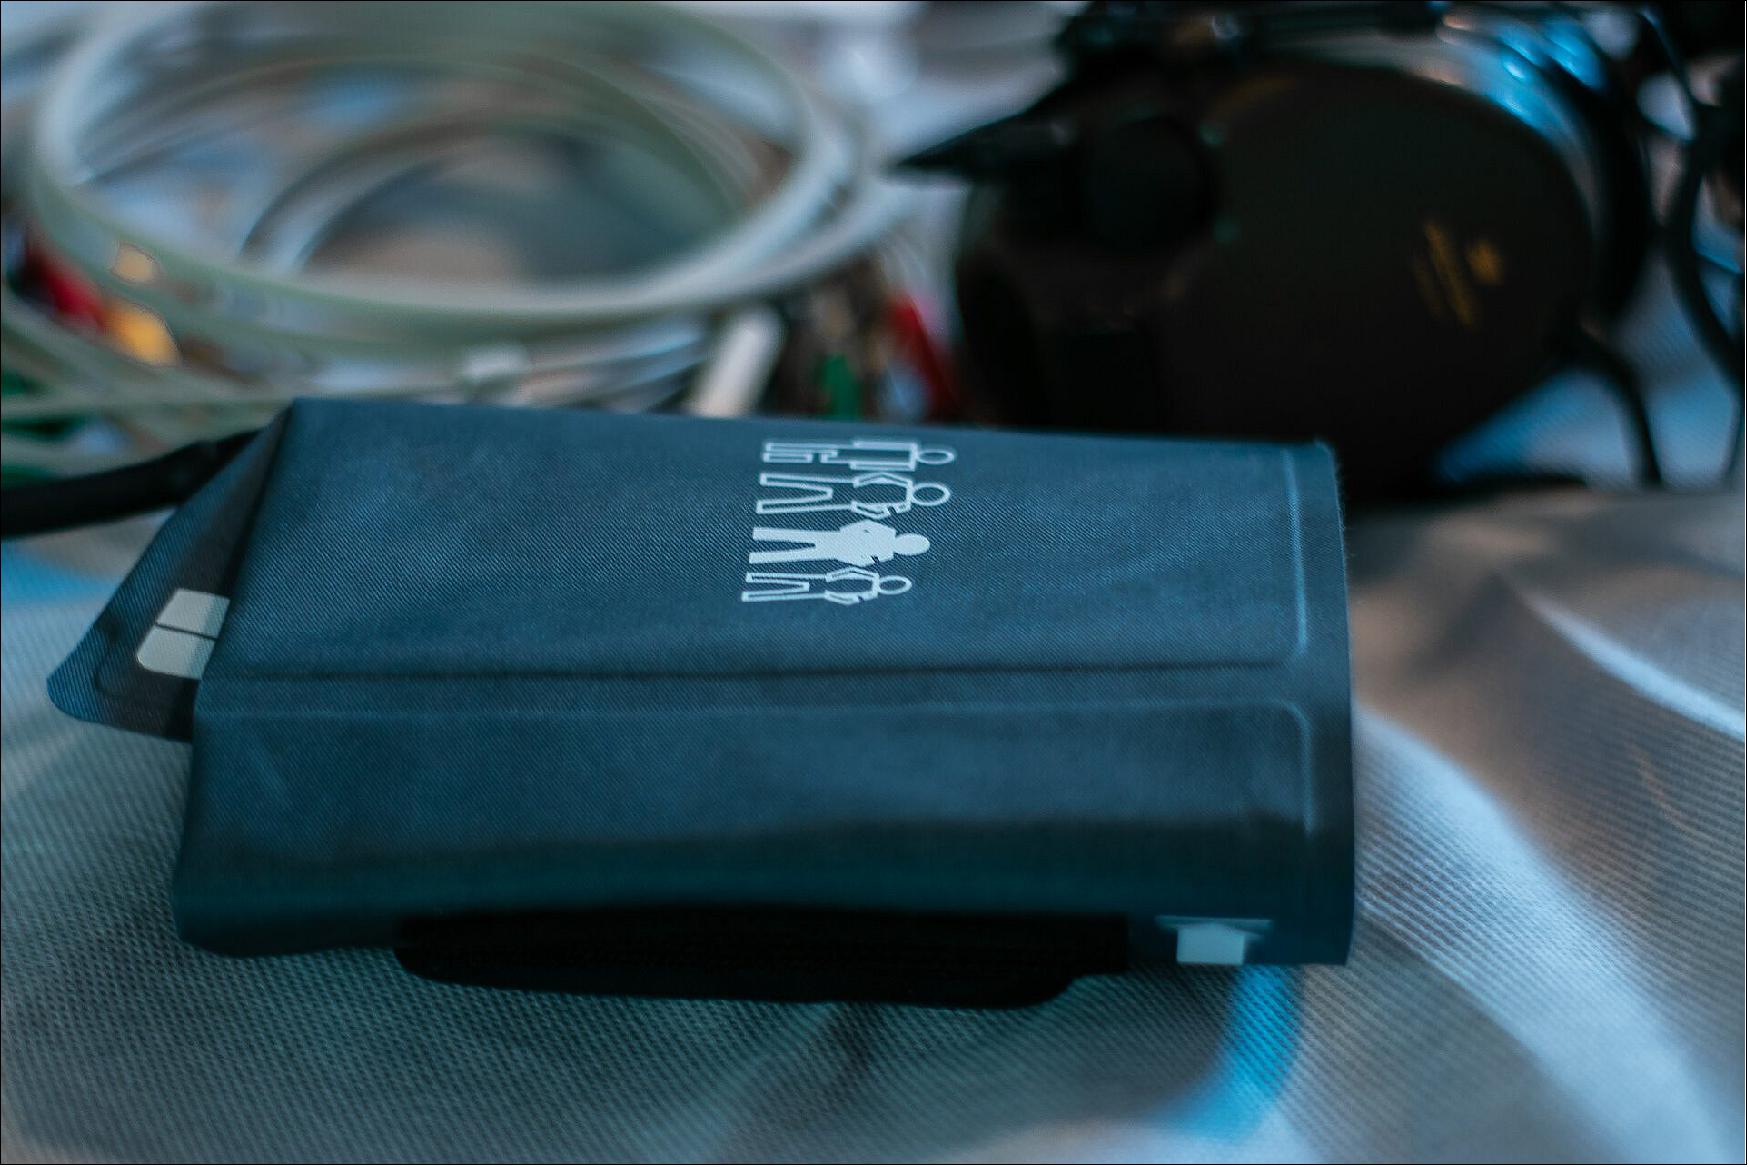 Figure 2: A blood pressure cuff used by emergency medical teams in Barcelona, Spain, where two ESA-provided Tempus Pro devices have been deployed to help in the fight against COVID-19 (image credit: SEM, CC BY-SA 3.0 IGO)